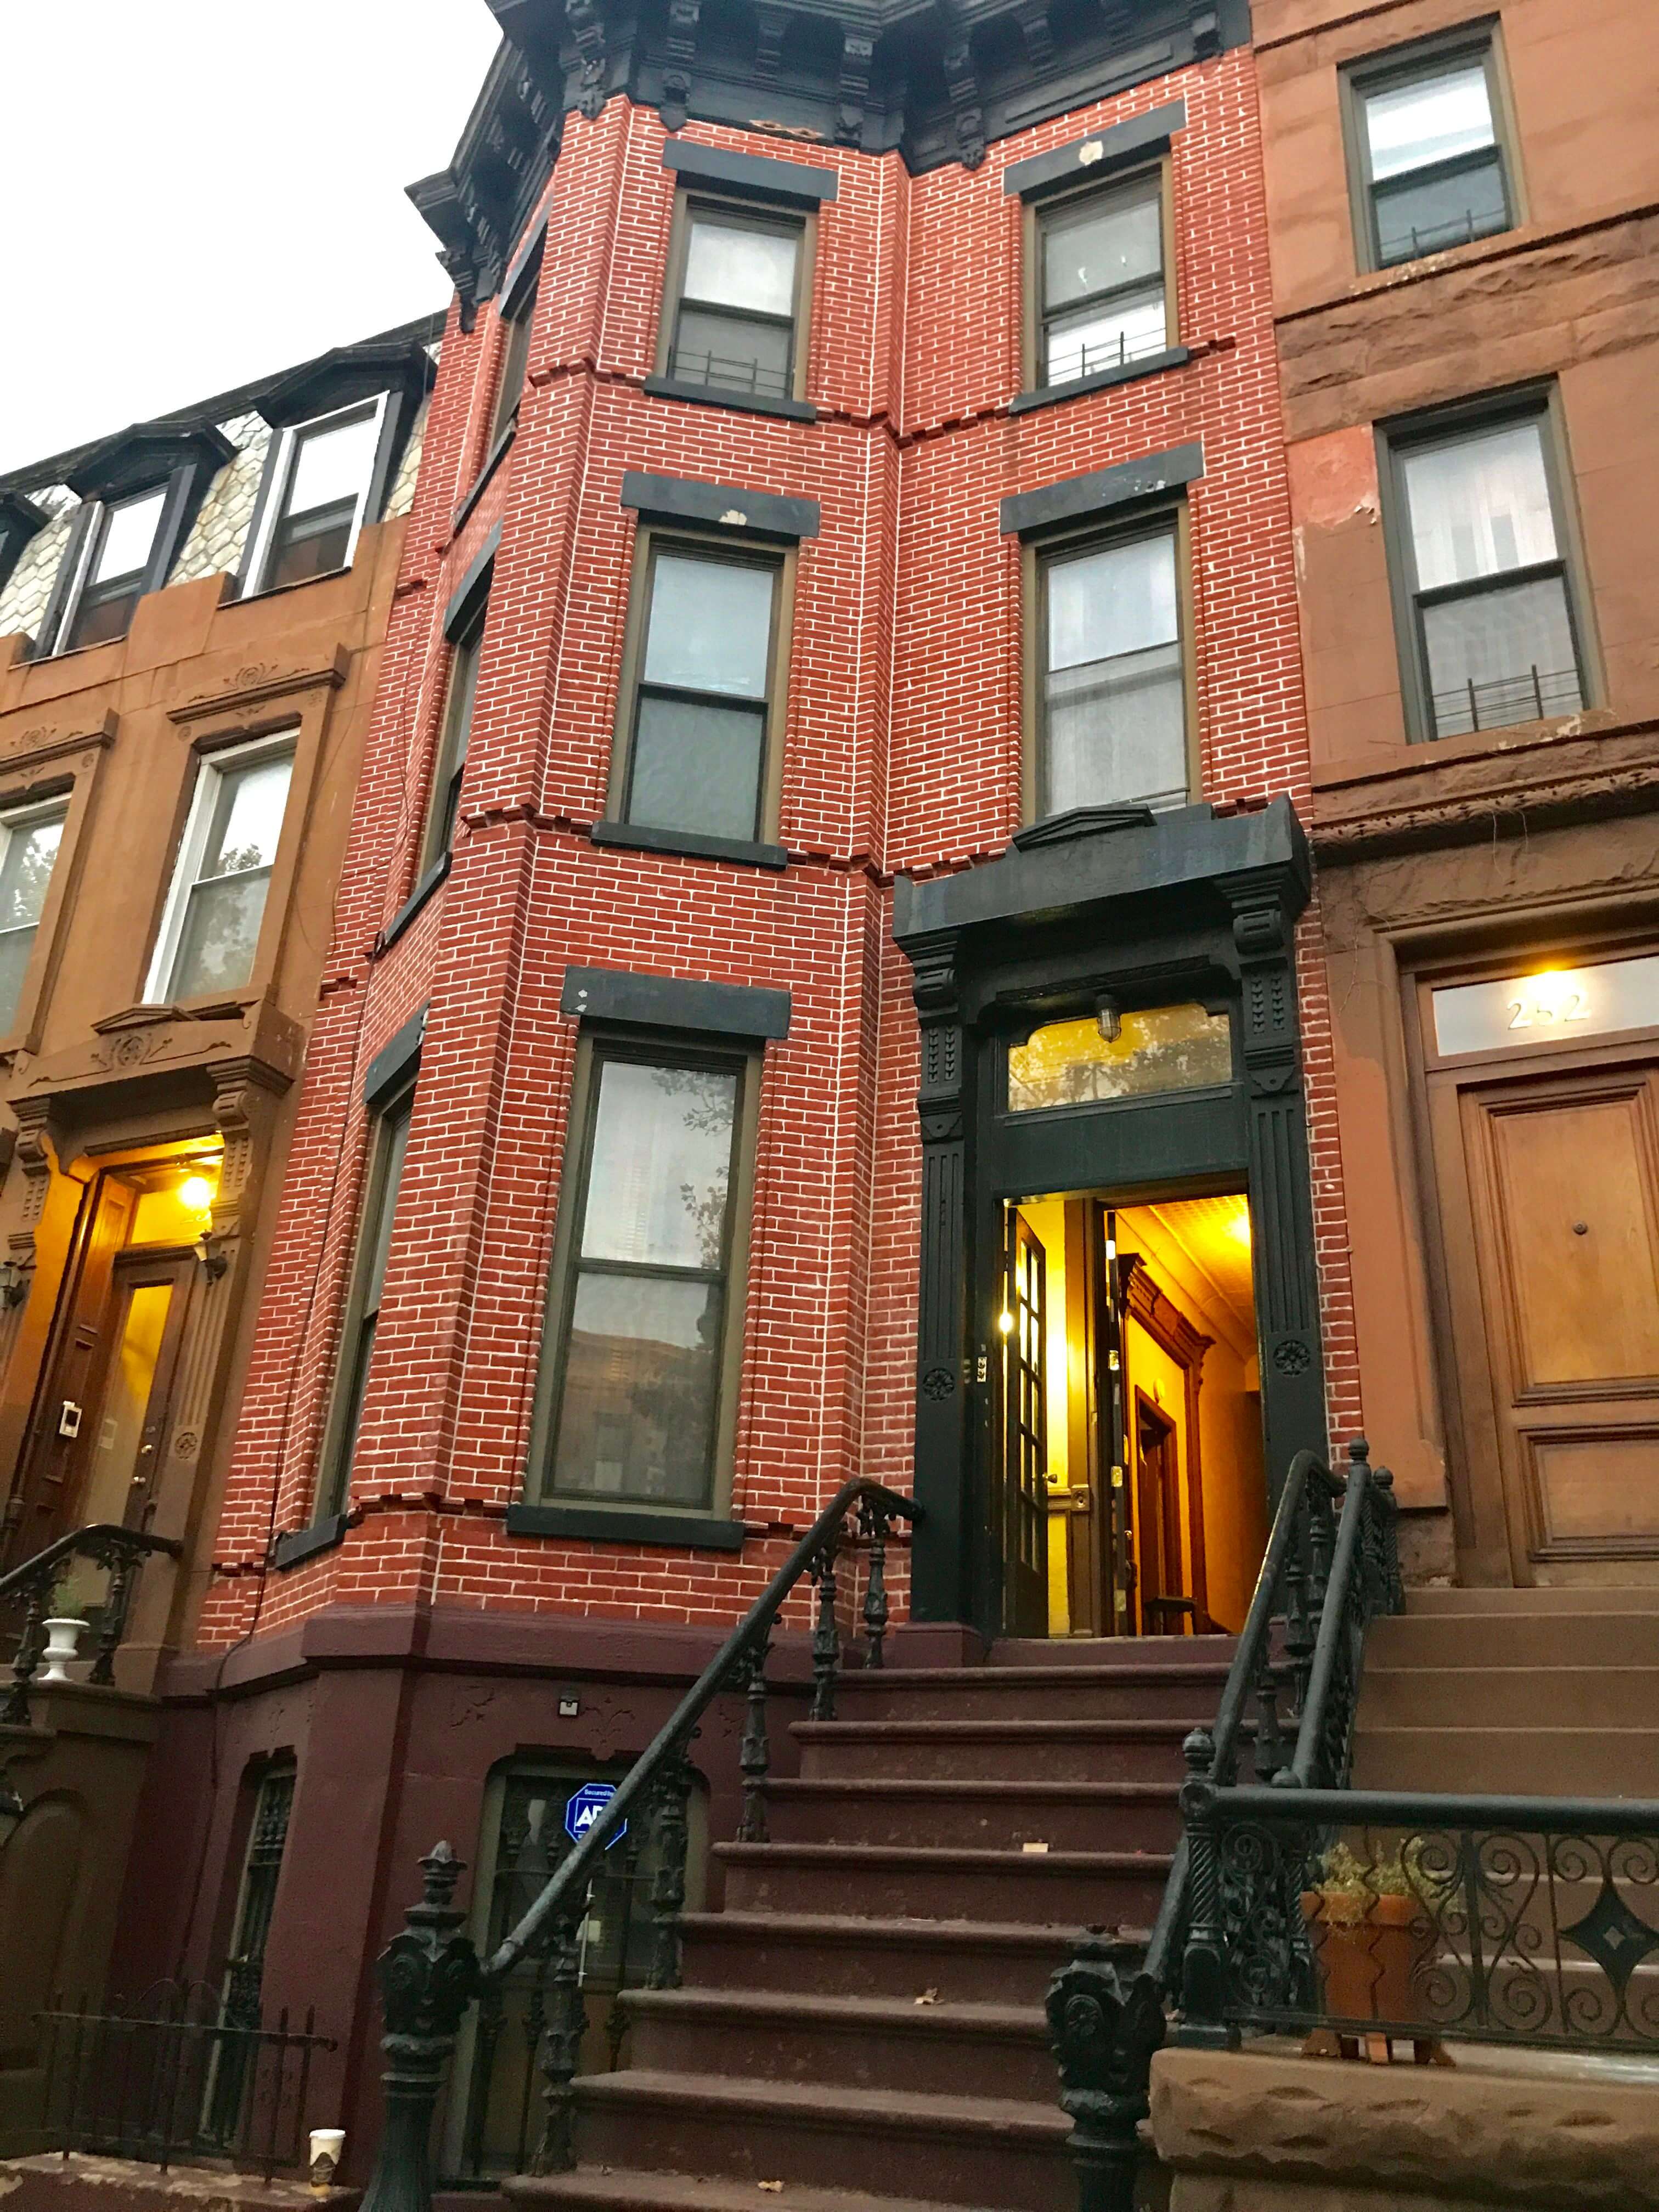 Brooklyn Homes for Sale in Park Slope Flatbush, Bed Stuy, East New York